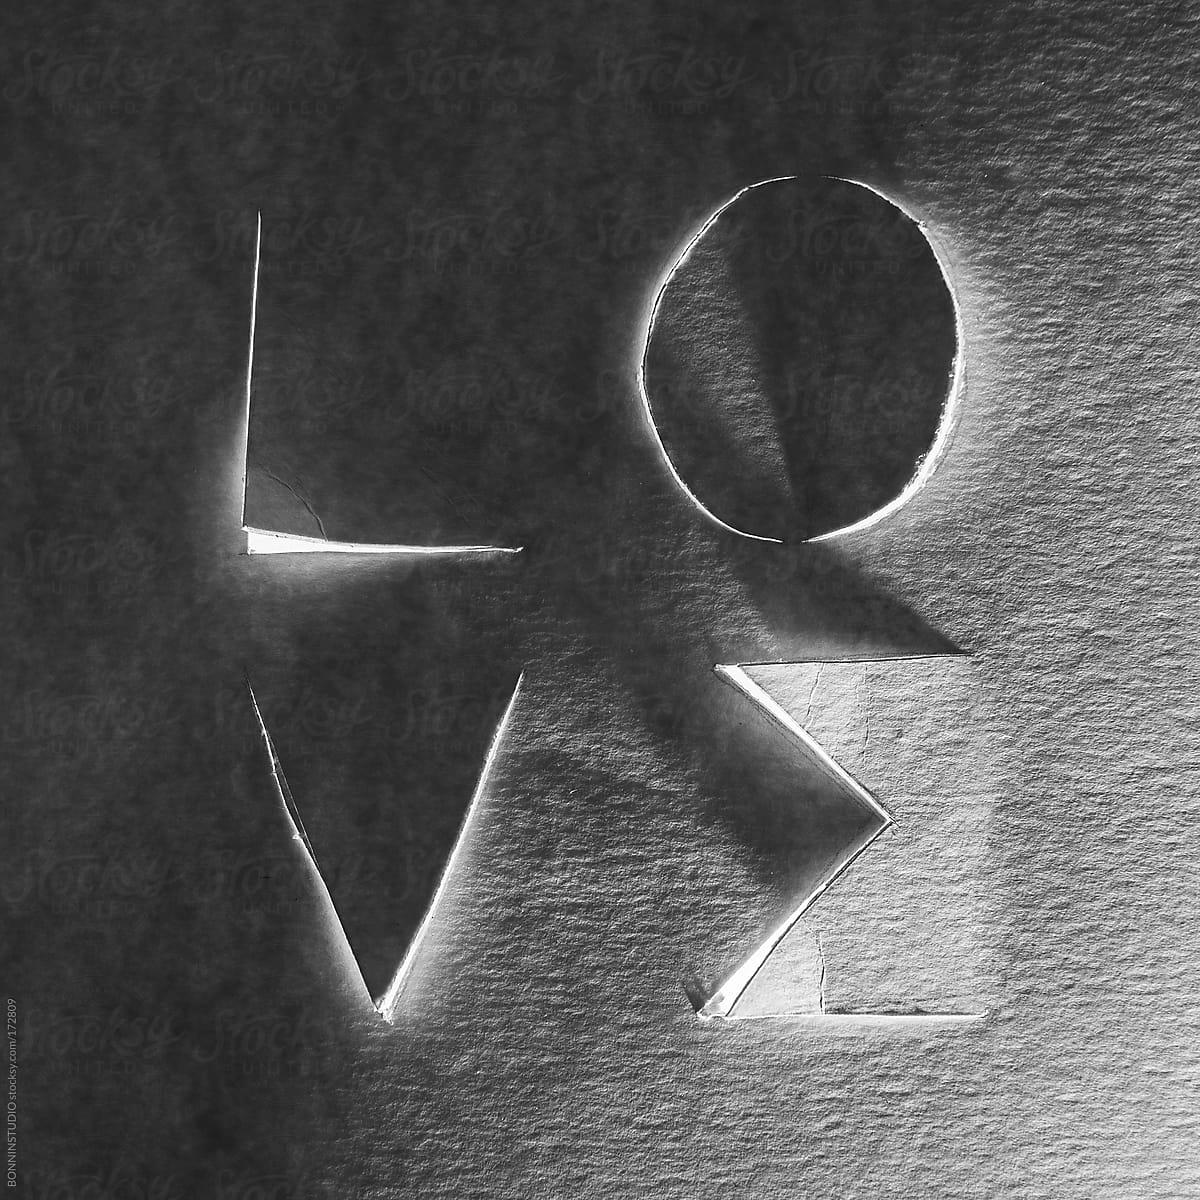 Love word cropped on cardboard. Black and white photo.